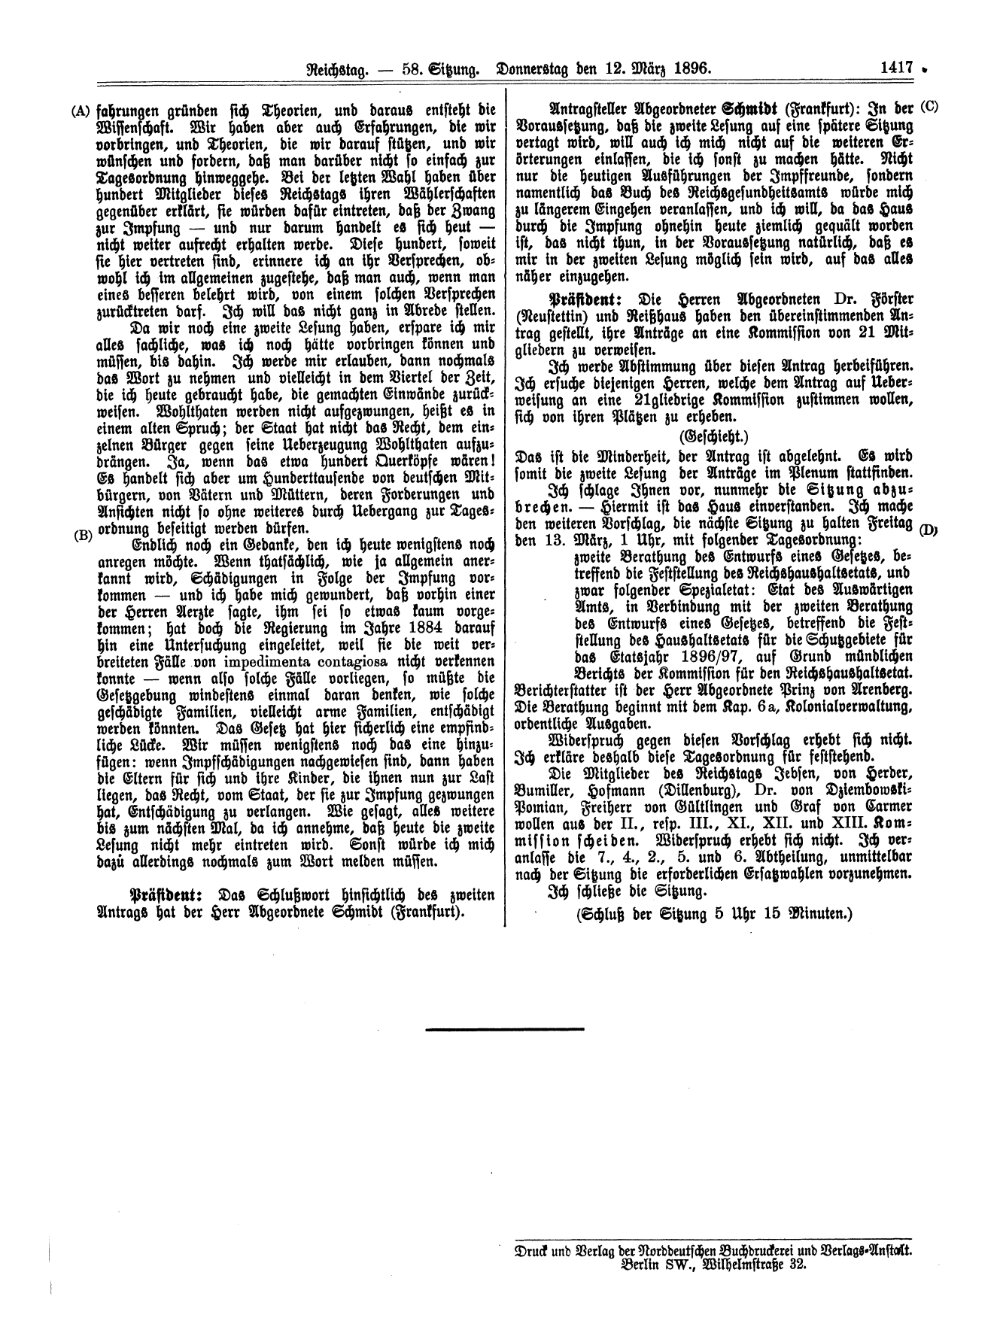 Scan of page 1417